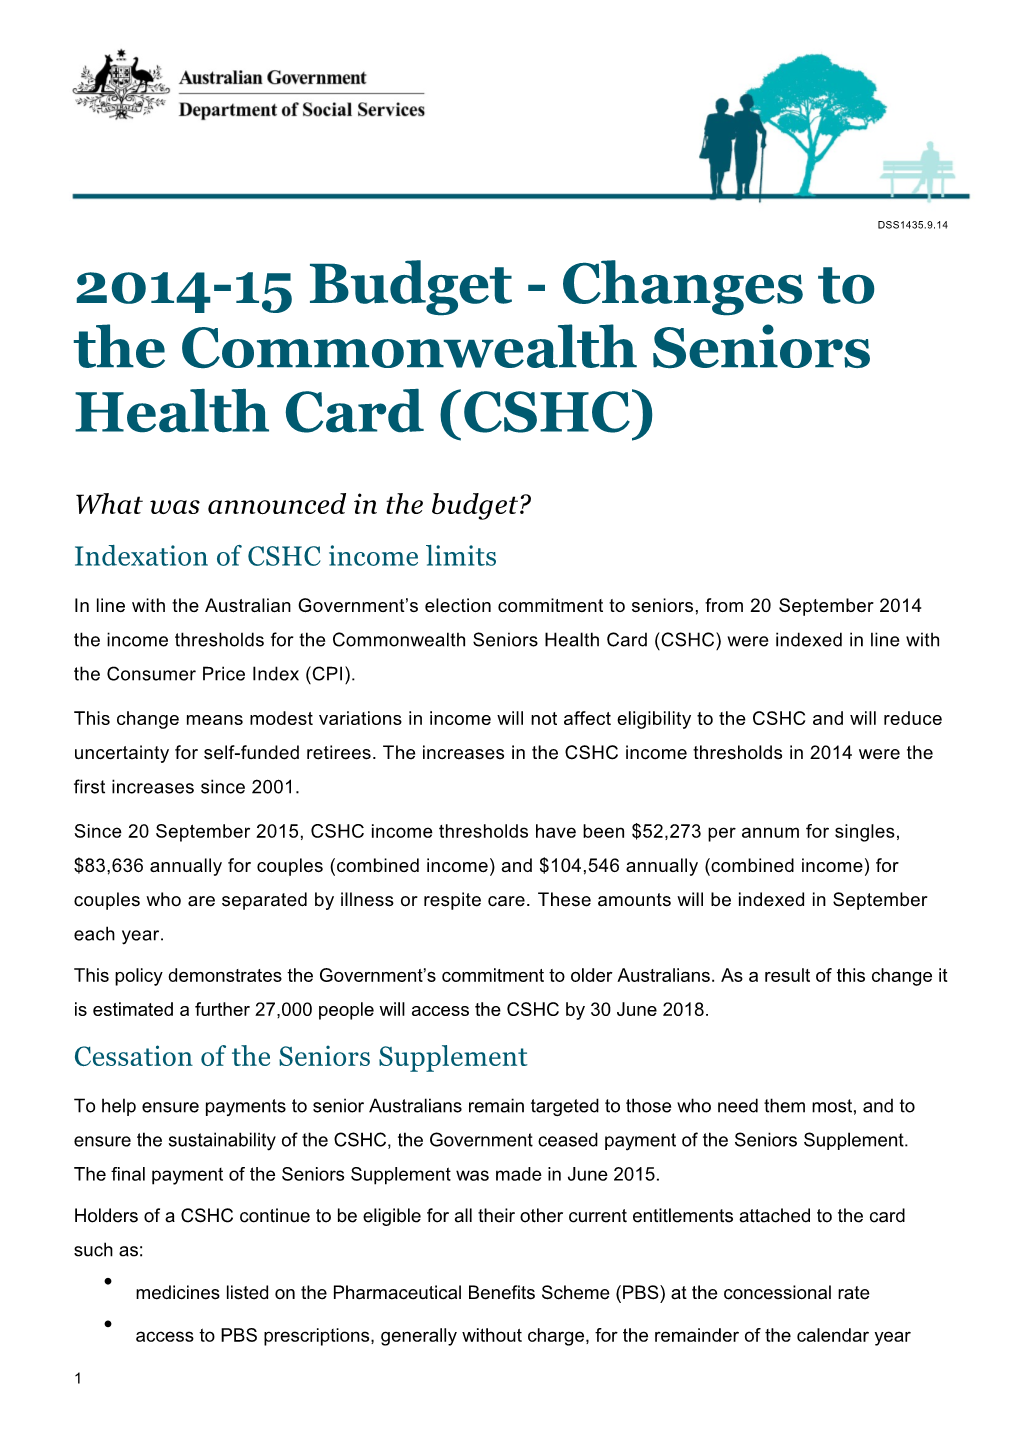 2014-15 Budget - Changes to the Commonwealth Seniors Health Card (CSHC)